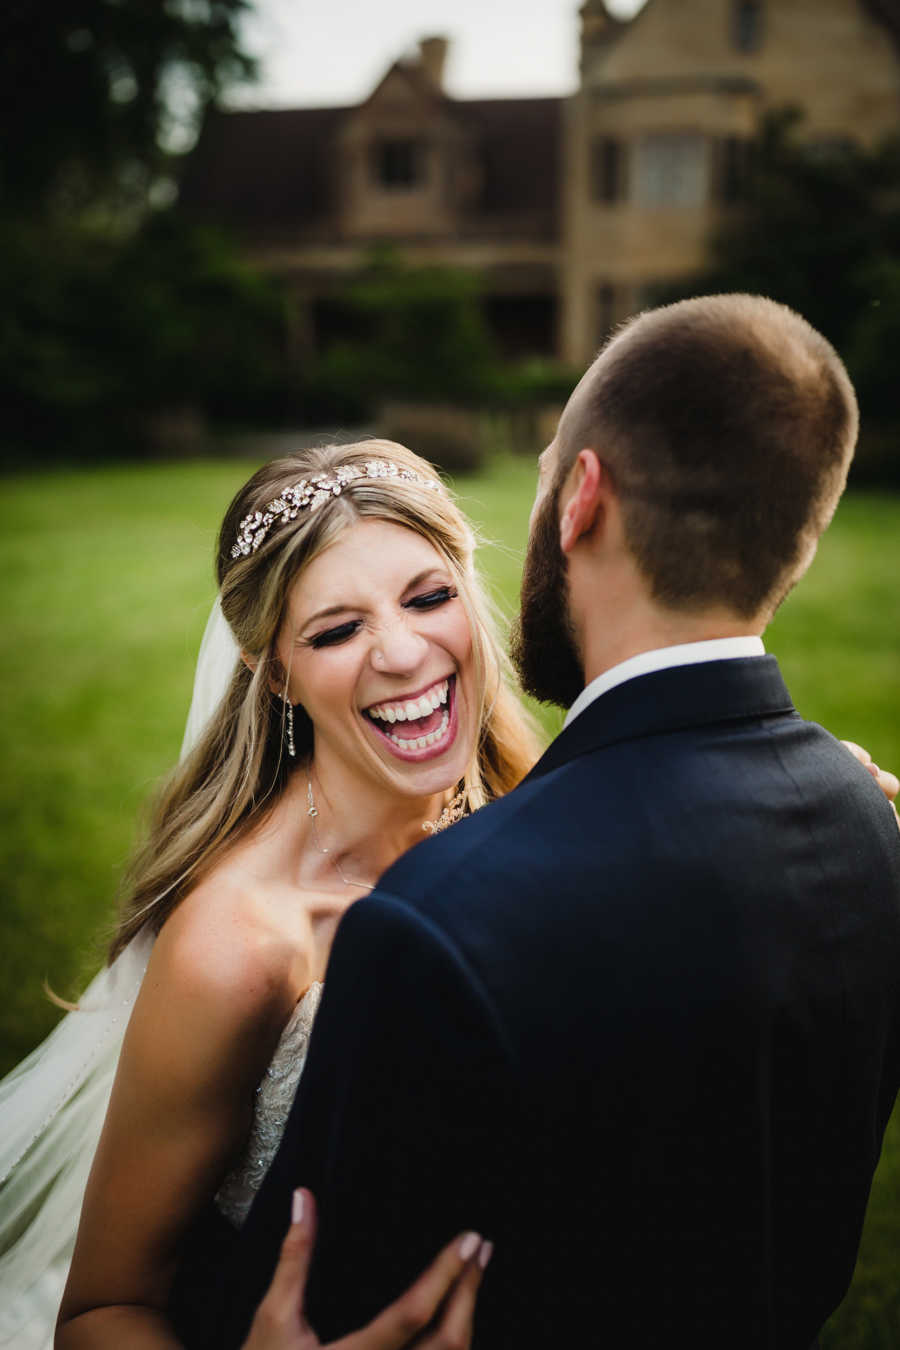 Woman laughs during candid moment during wedding photoshoot with her new husband